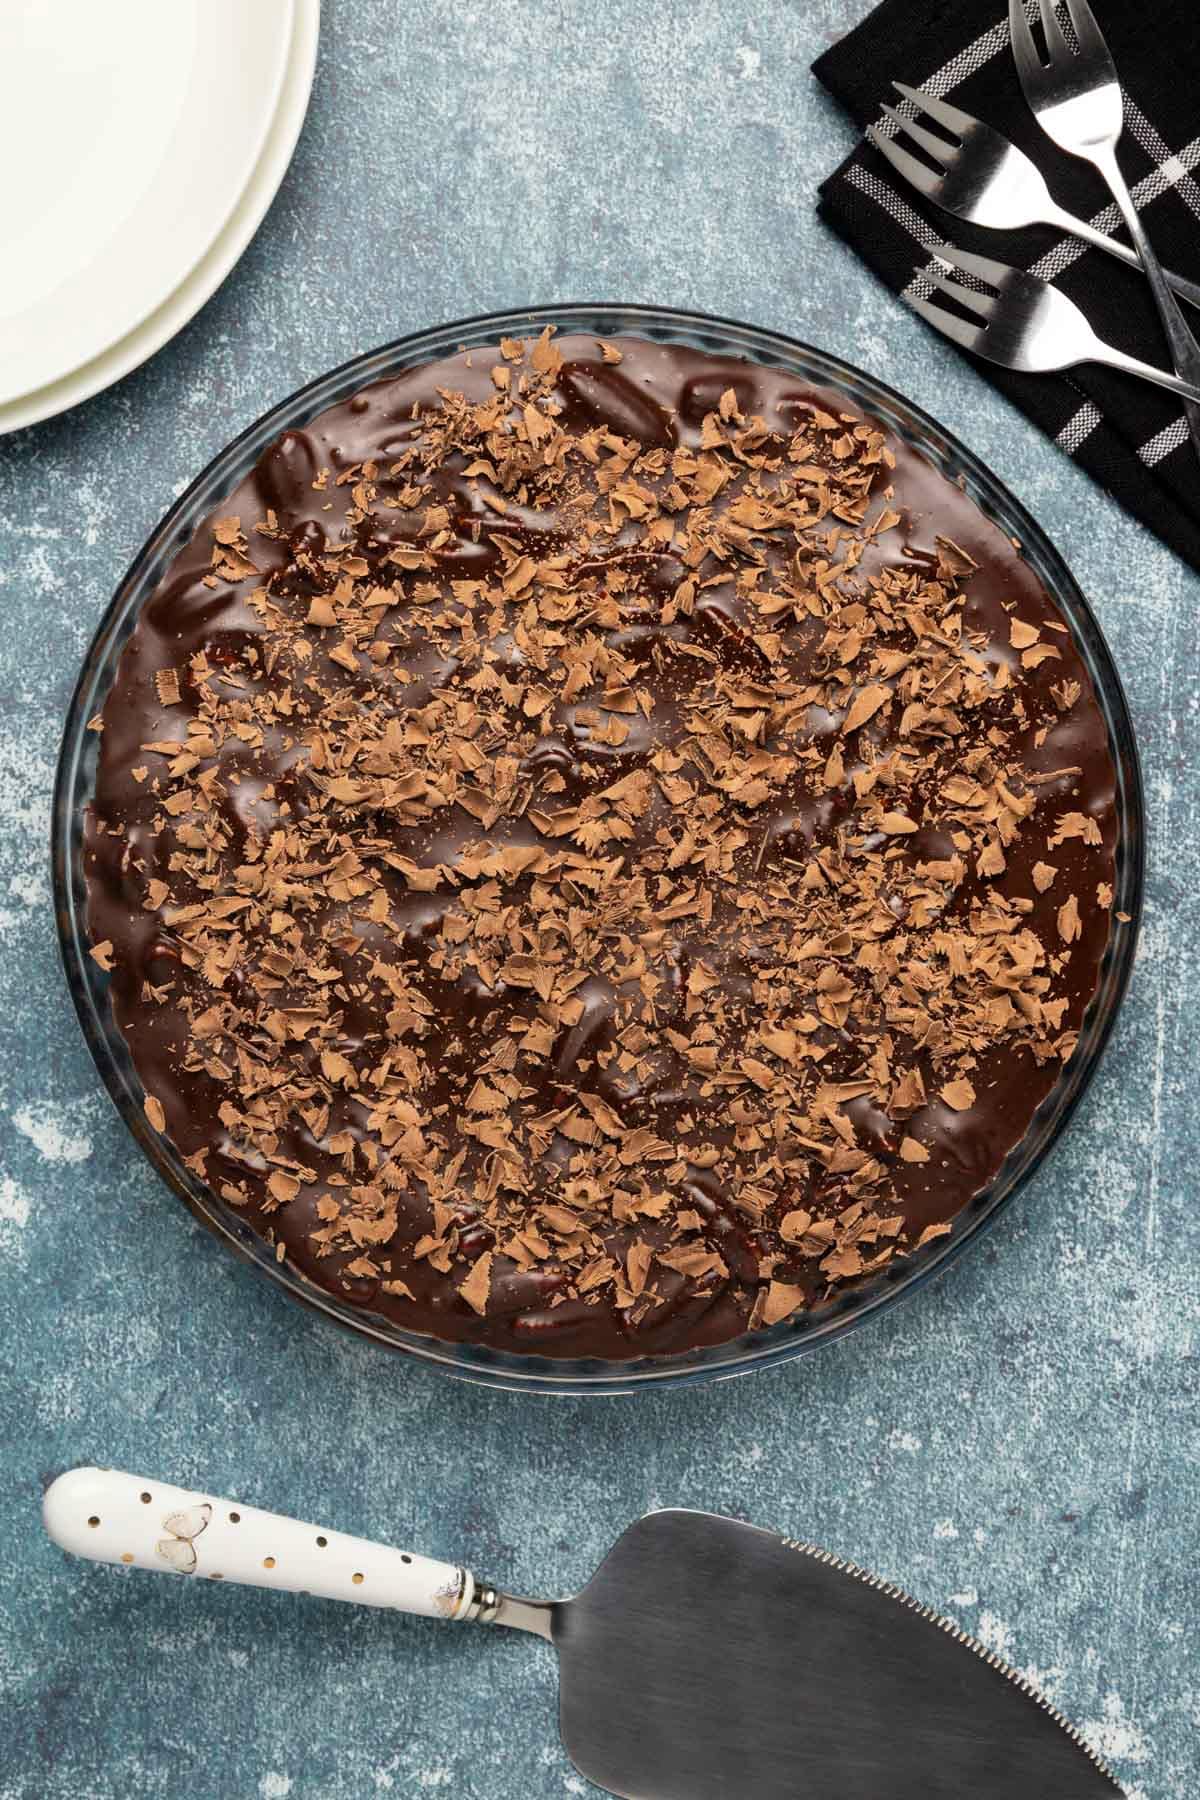 Vegan chocolate tart topped with chocolate shavings in a glass pie dish.